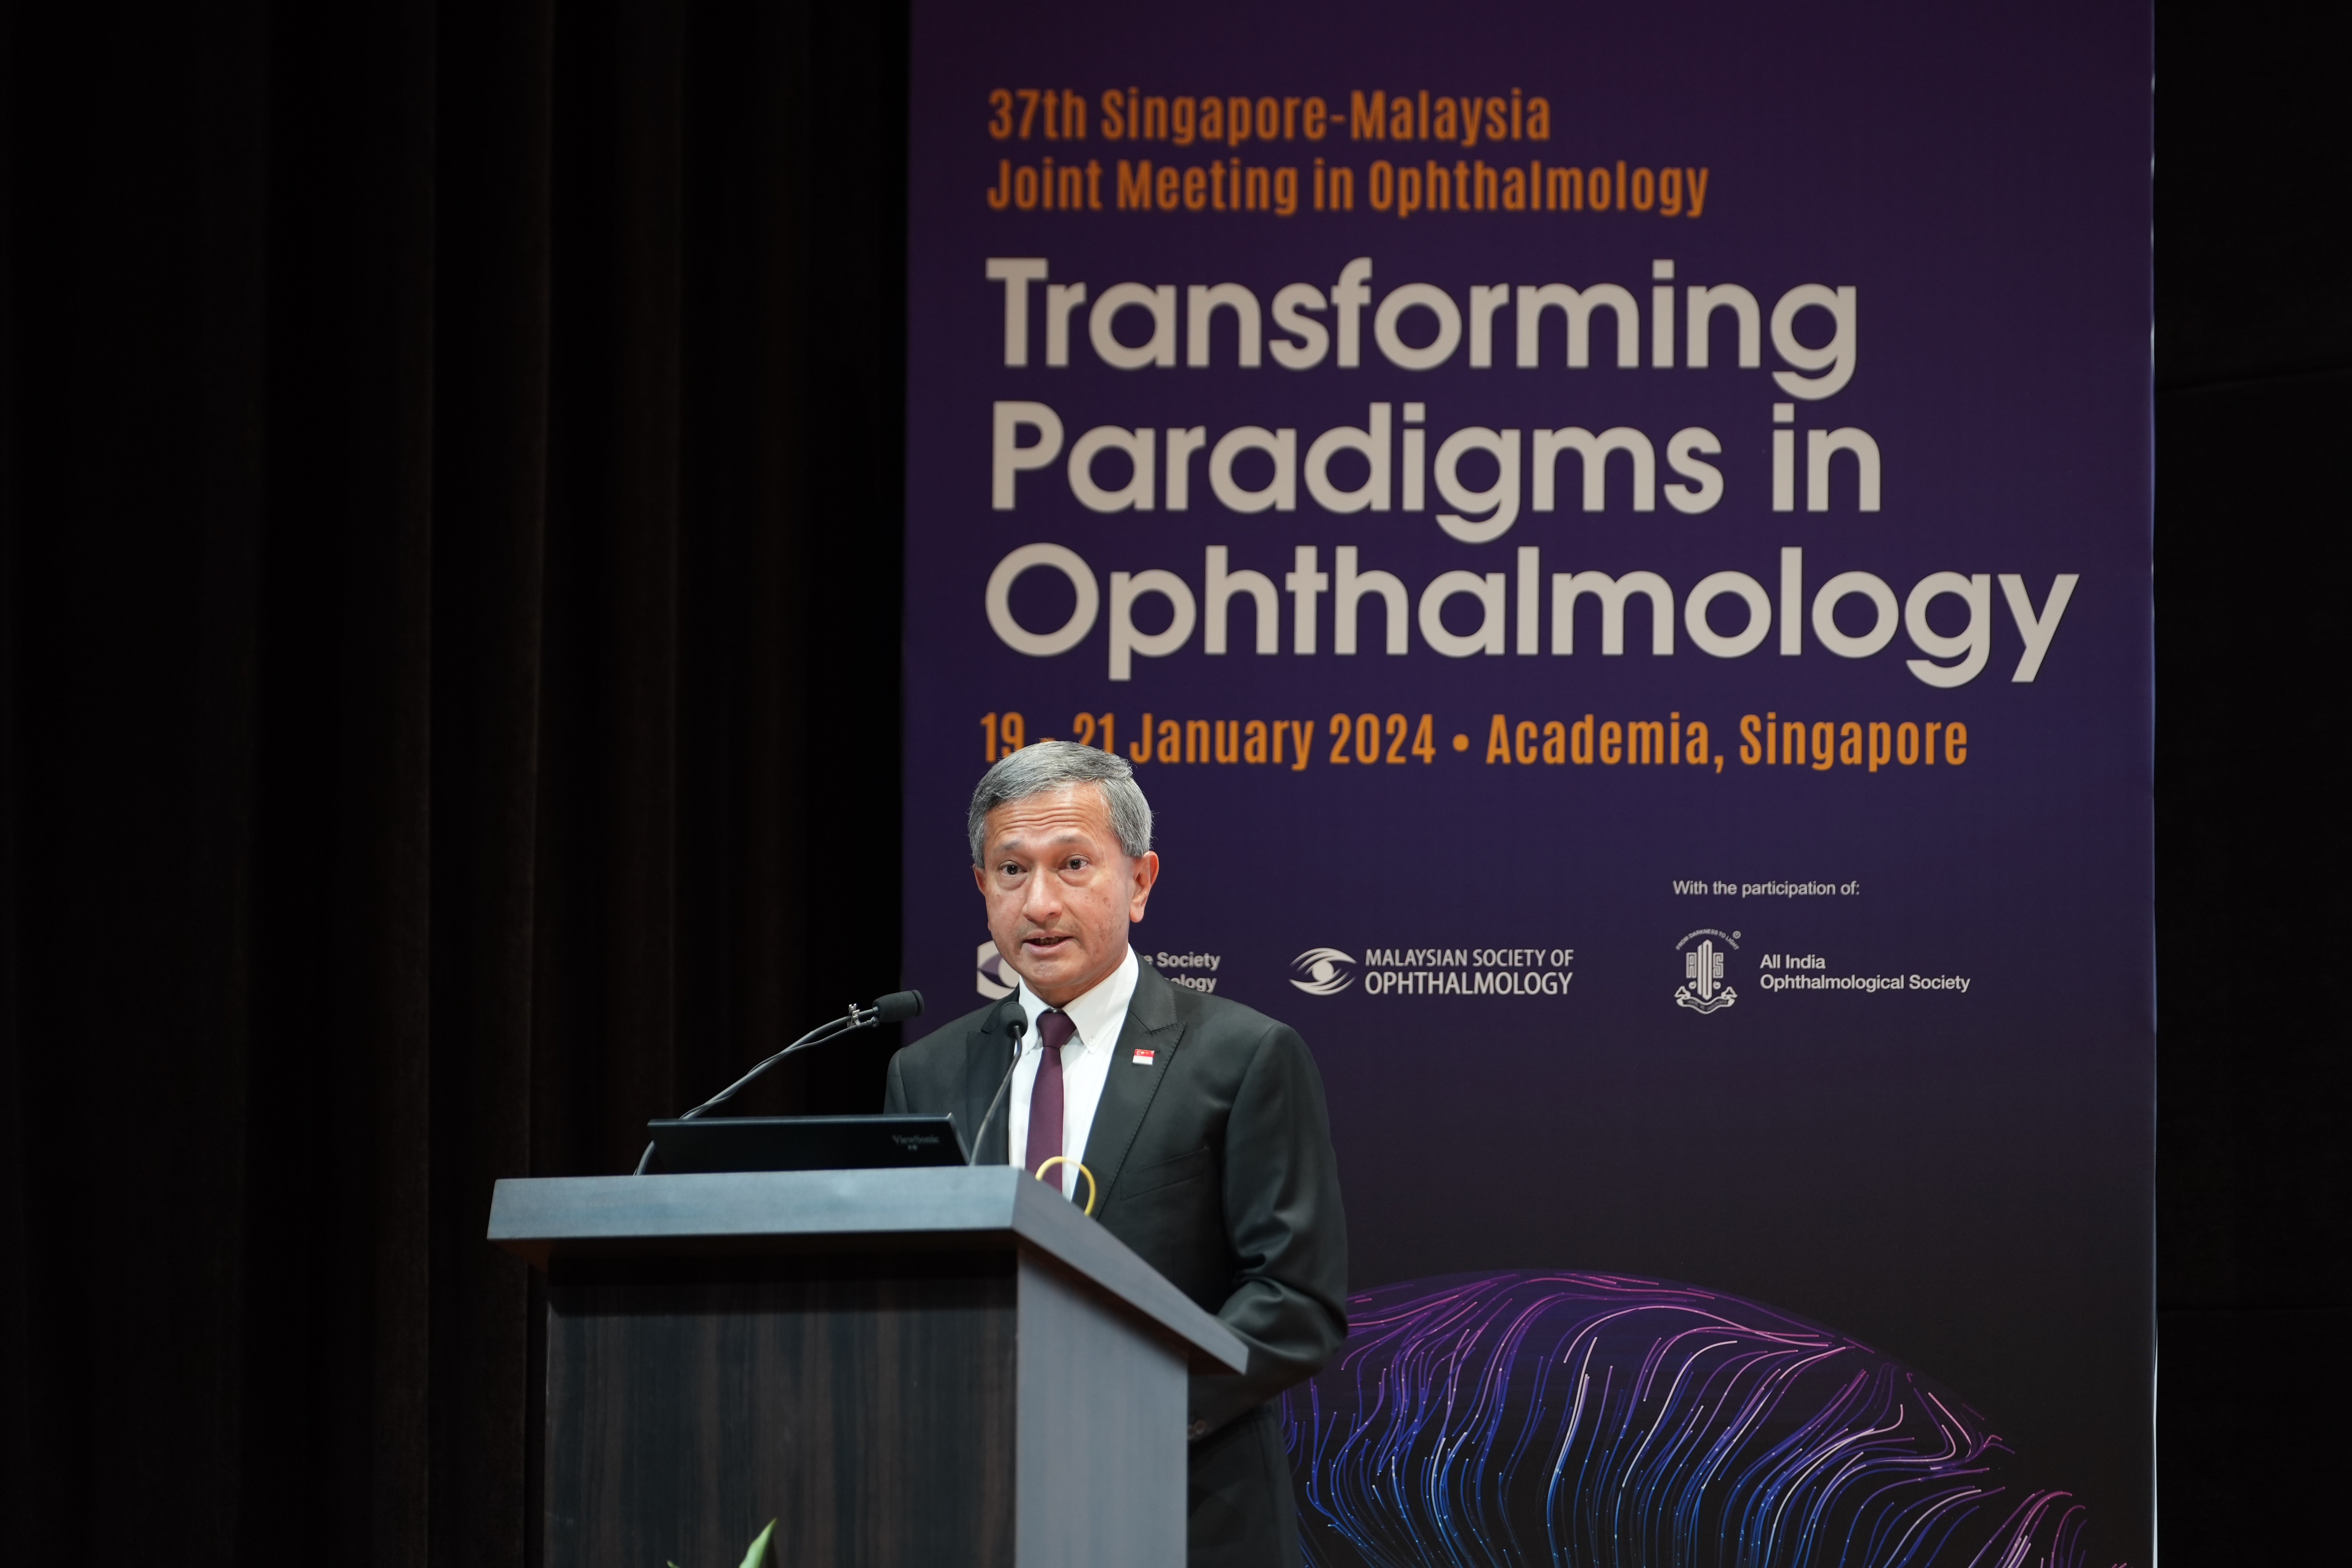 Singapore National Eye Centre collaborates with WHO to build eye care capability and capacity in Southeast Asia